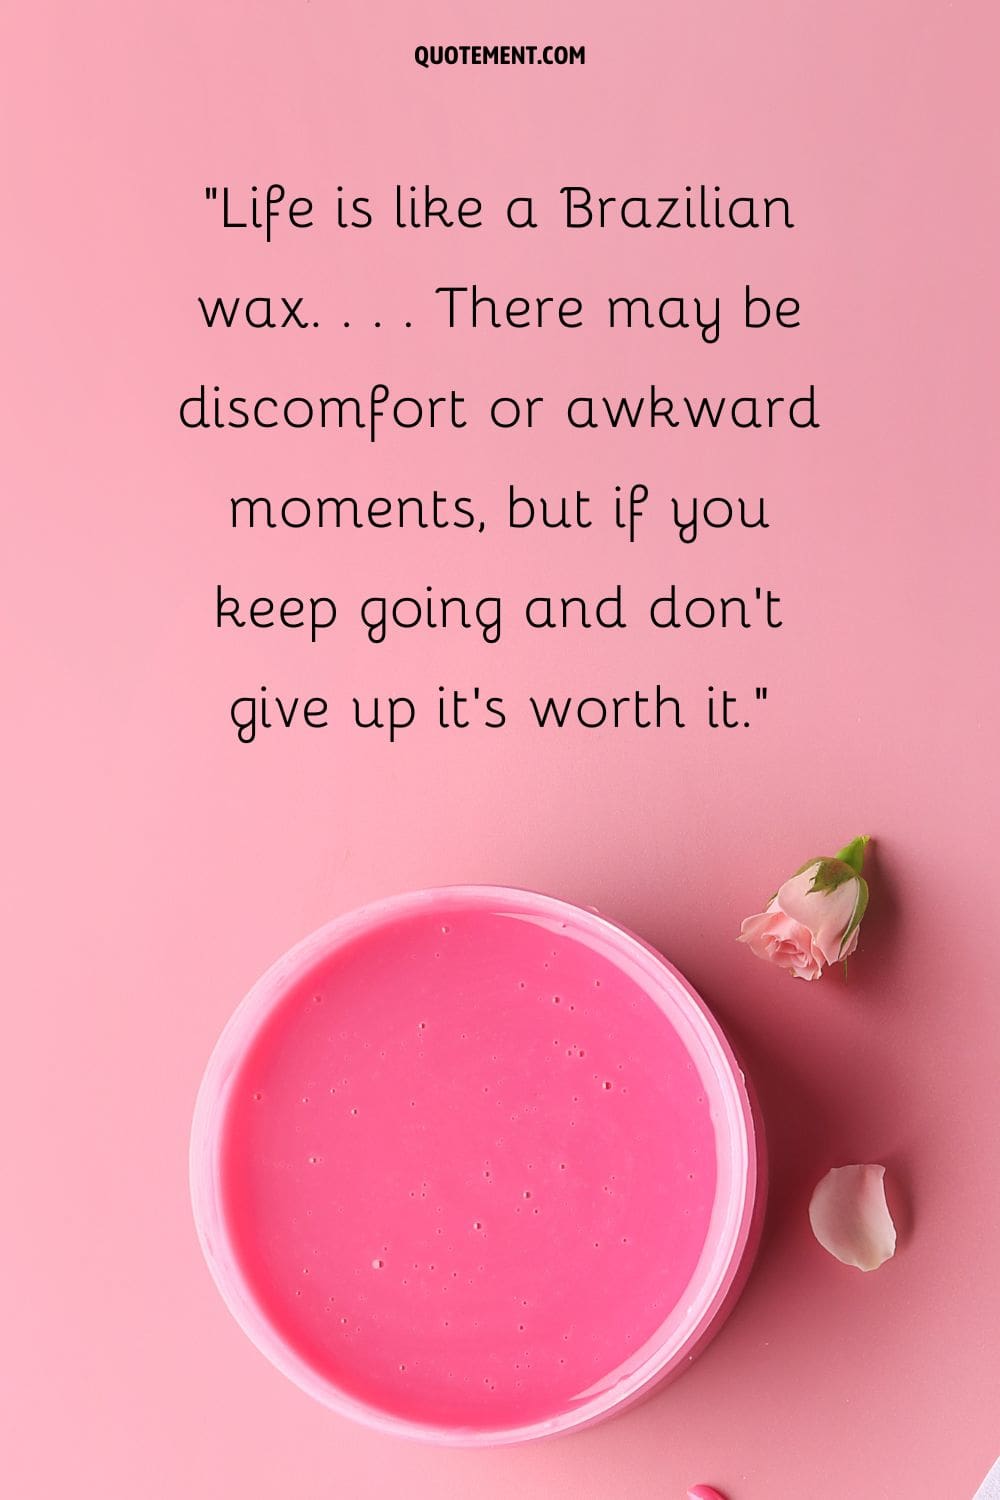 Life is like a Brazilian wax. . . . There may be discomfort or awkward moments, but if you keep going and don’t give up it’s worth it.